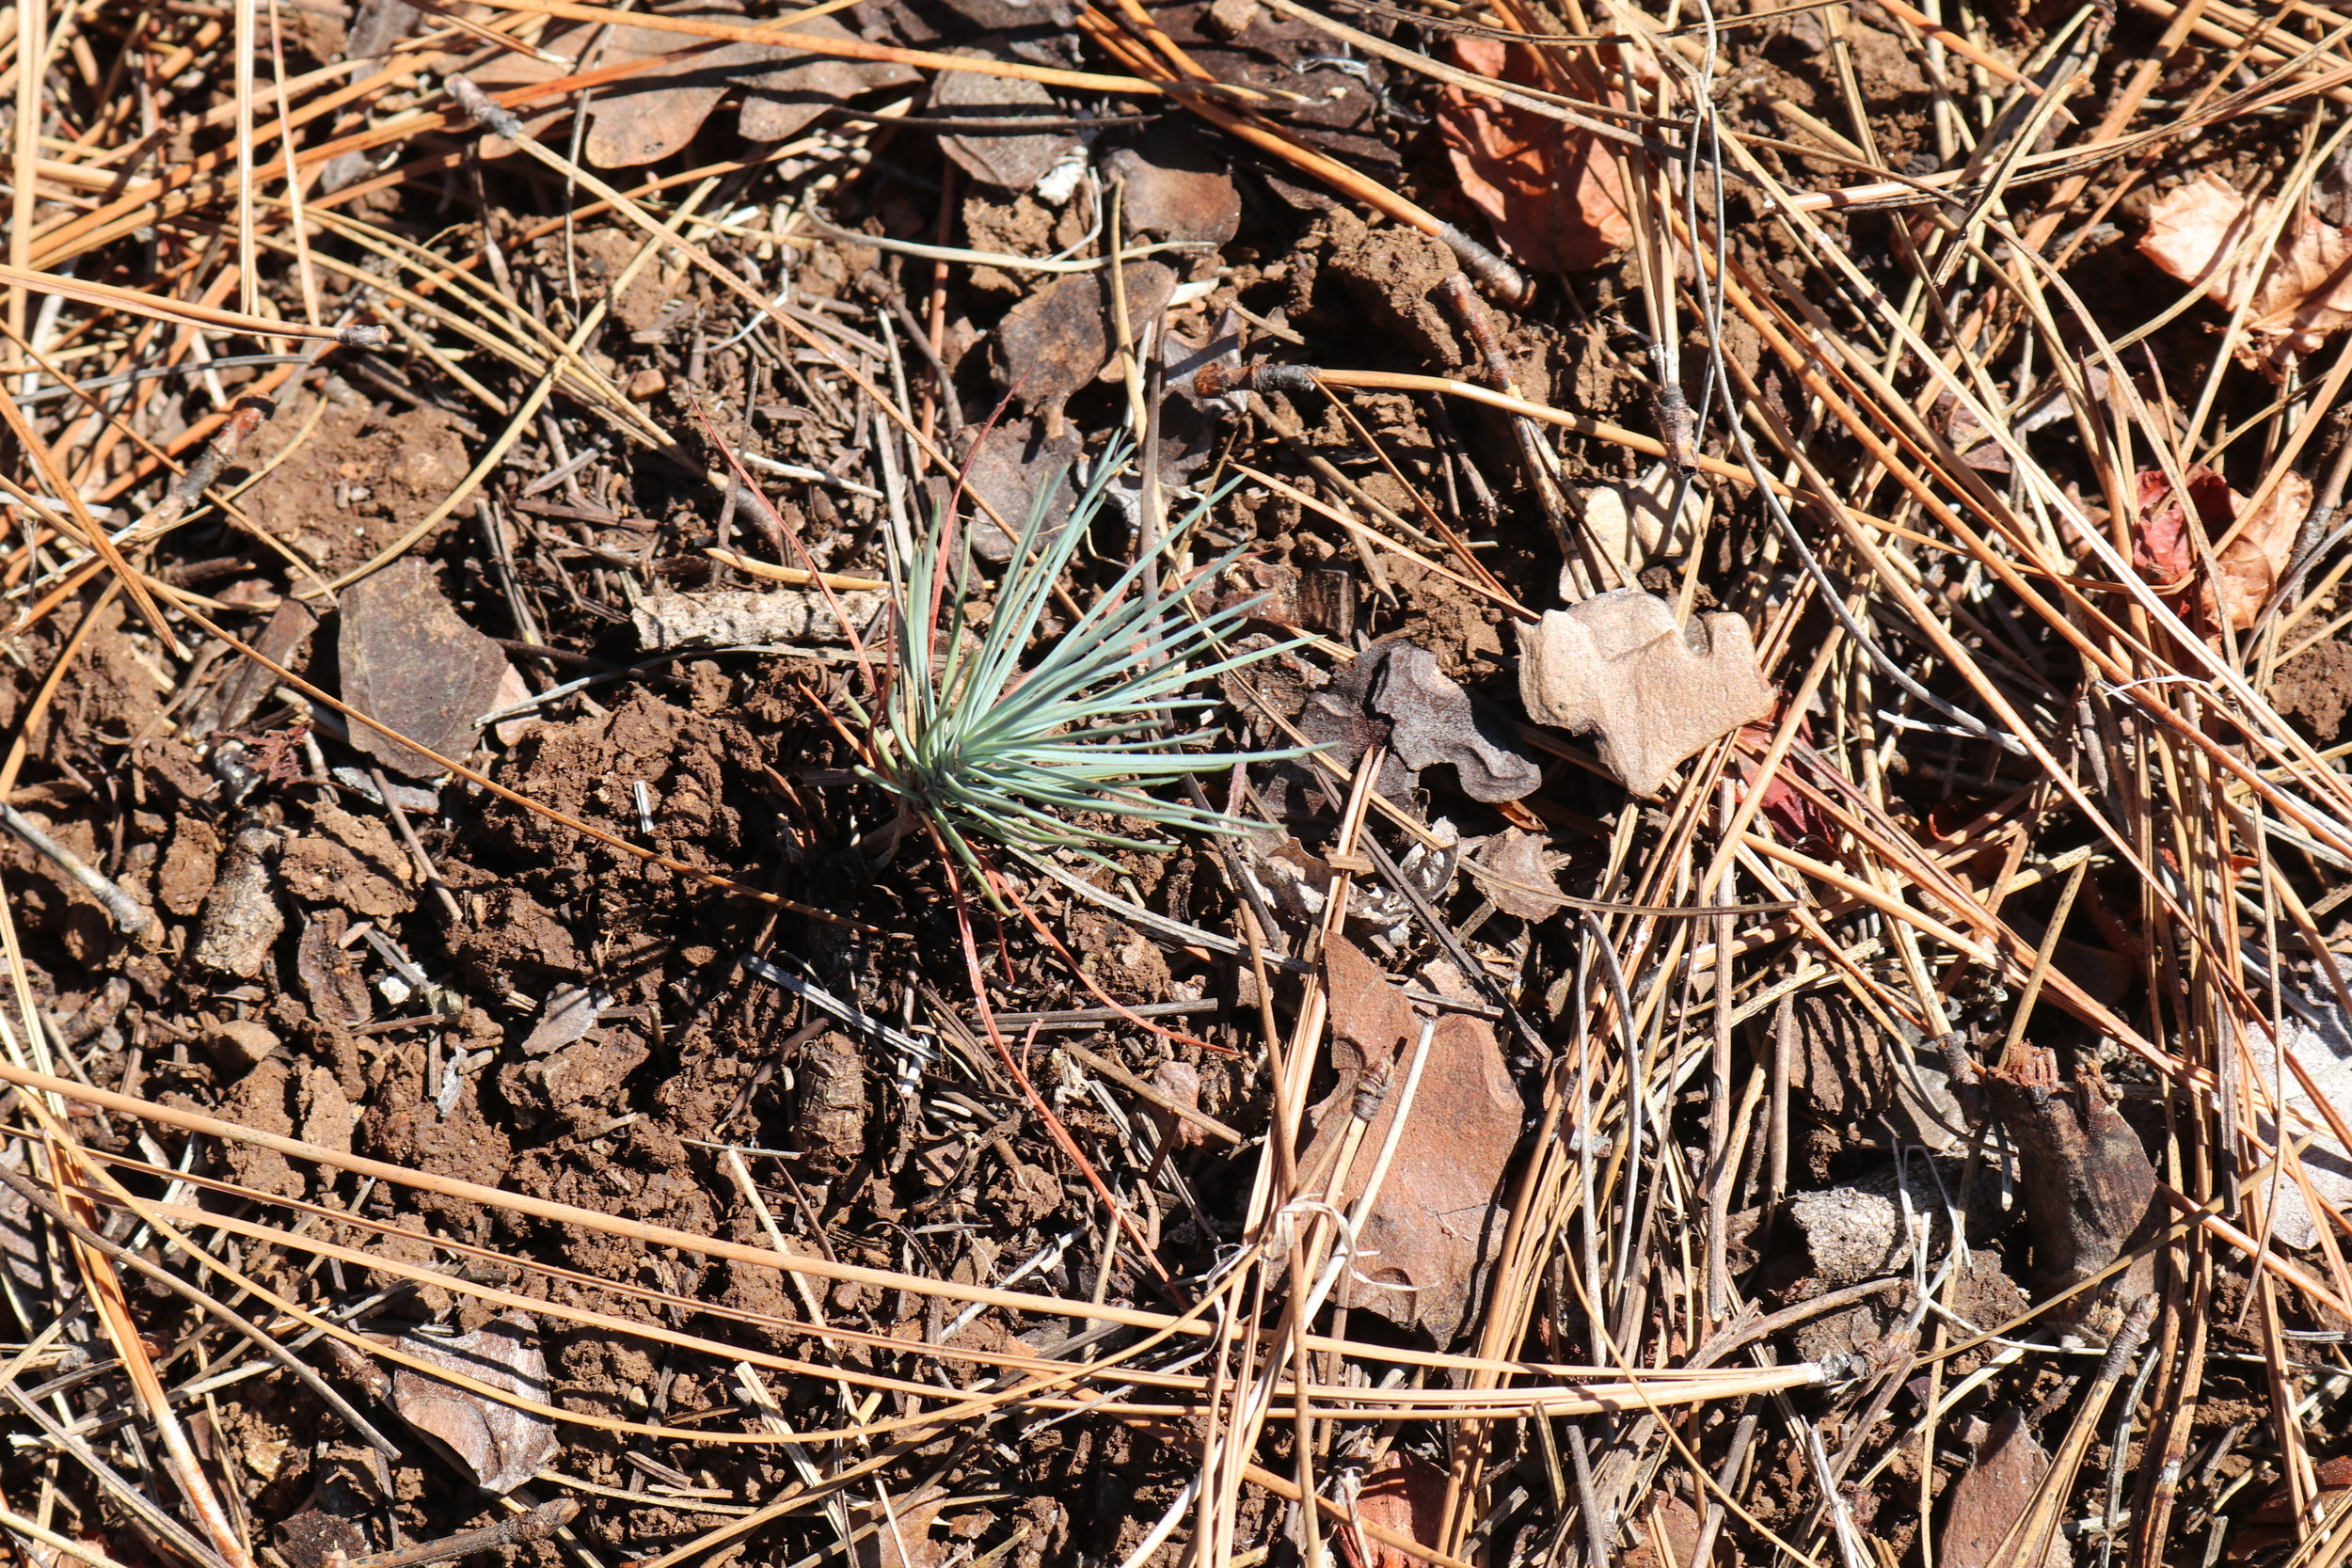  As the day warmed up we remained in good spirits knowing that we were accomplishing this work together. After lunch we made our way down to Star Flat meadow where we were greeted with new signs of growth from 8 new baby Jeffrey Pine saplings! (PC: G